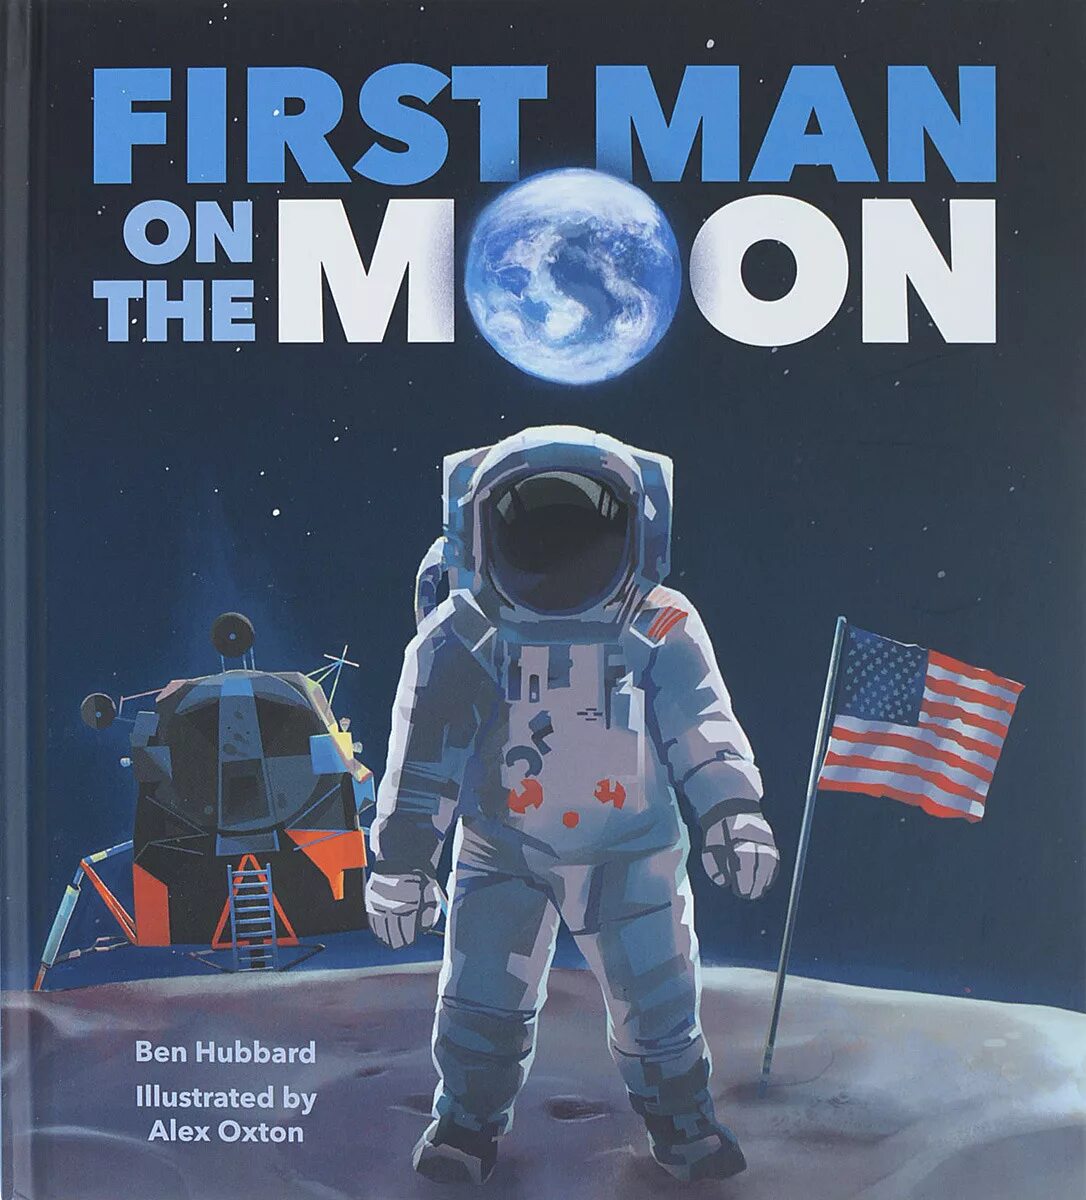 Man lands on the moon. First man on the Moon. The first the first man Lands on the Moon. Who was the first man on the Moon. Moon man книги.